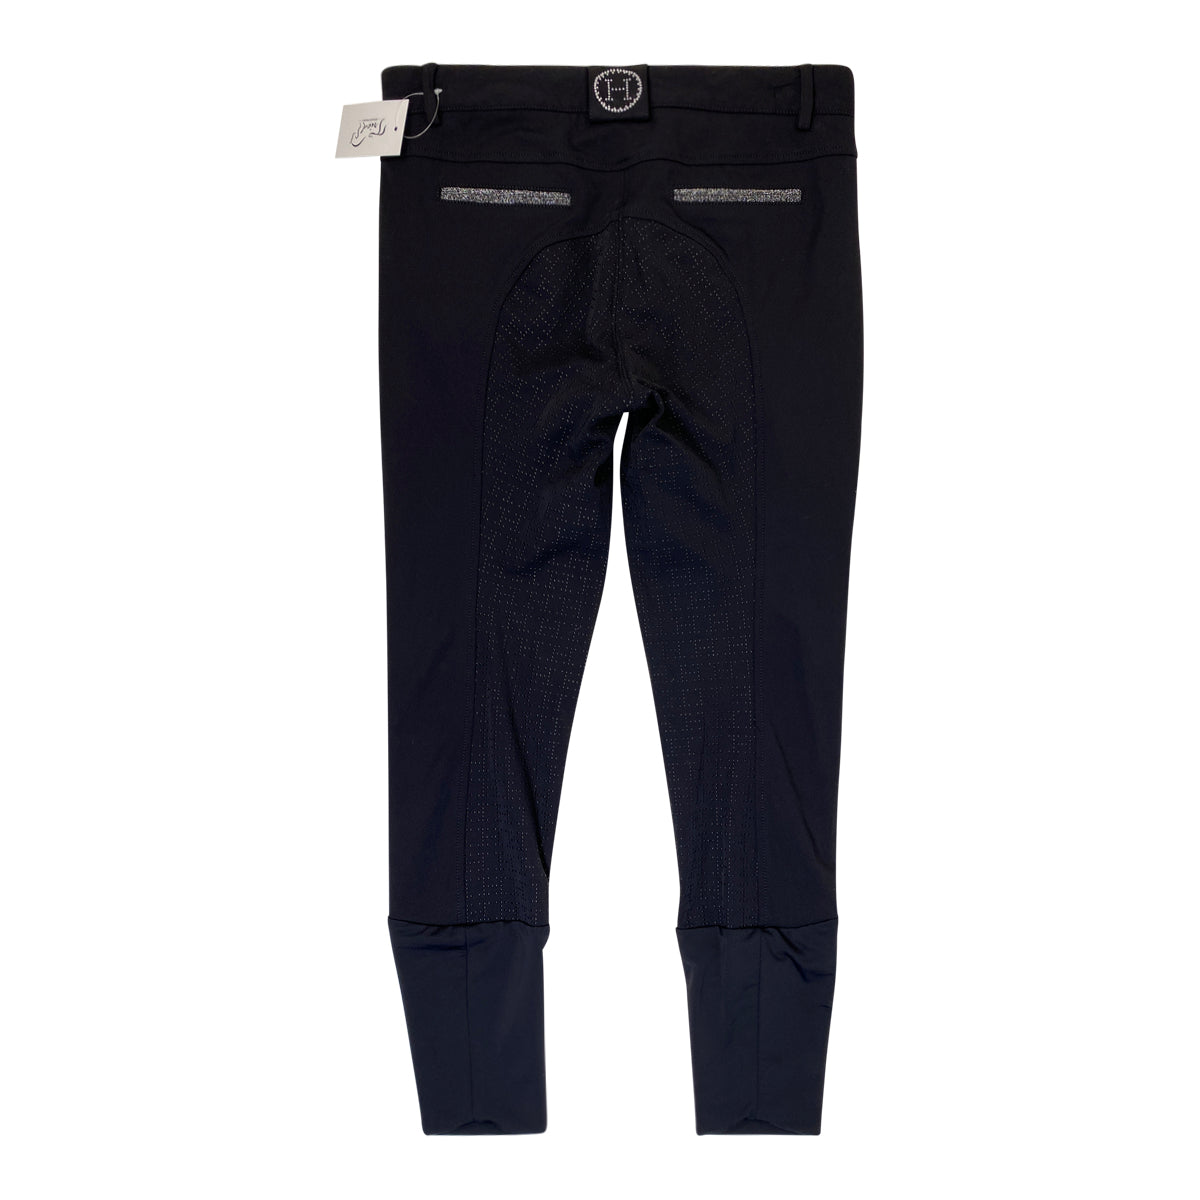 Harcour 'Boogie' Full Seat Breeches in Black/Crystal